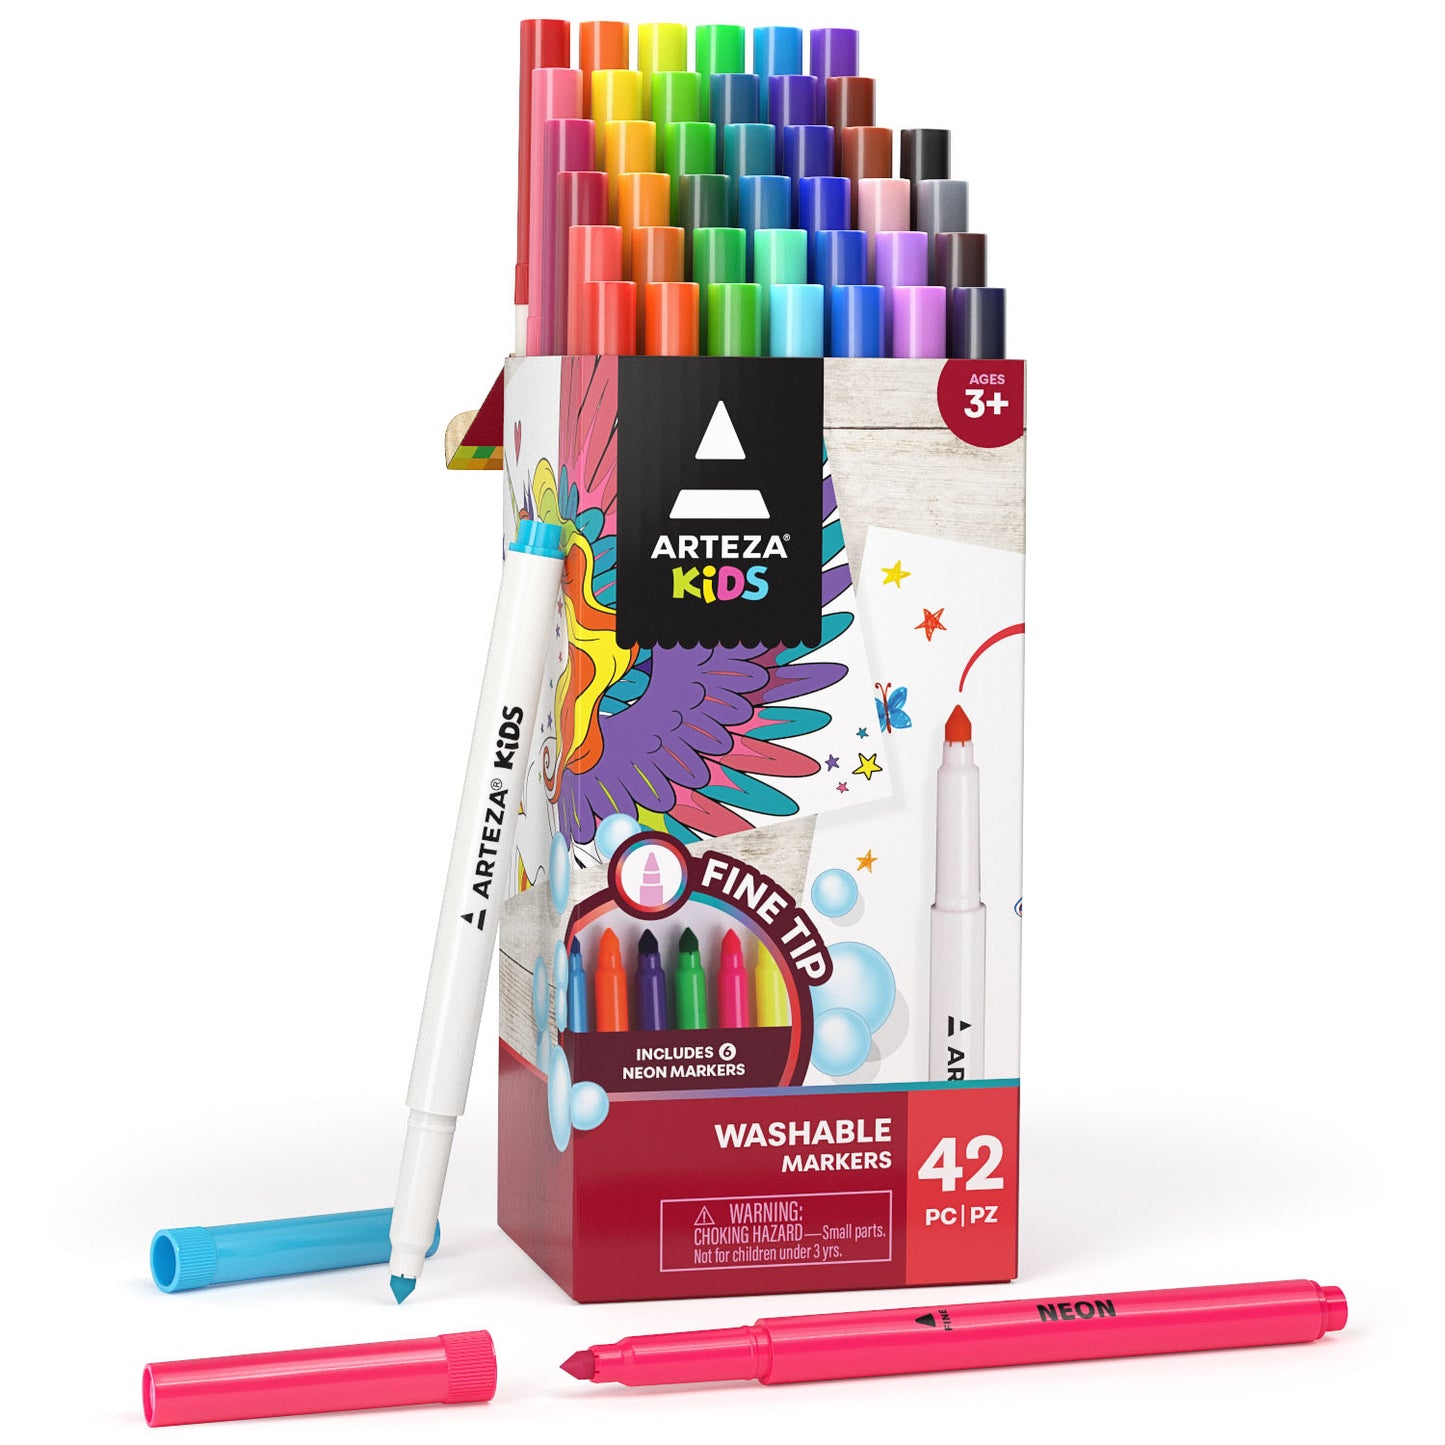  ARTEZA Kids Washable Markers, Bright Colors, 16 Brush Tip  Erasable Marker Pens and 2 Eraser Pens, School Supplies for Kids Ages 3 and  Up : Toys & Games